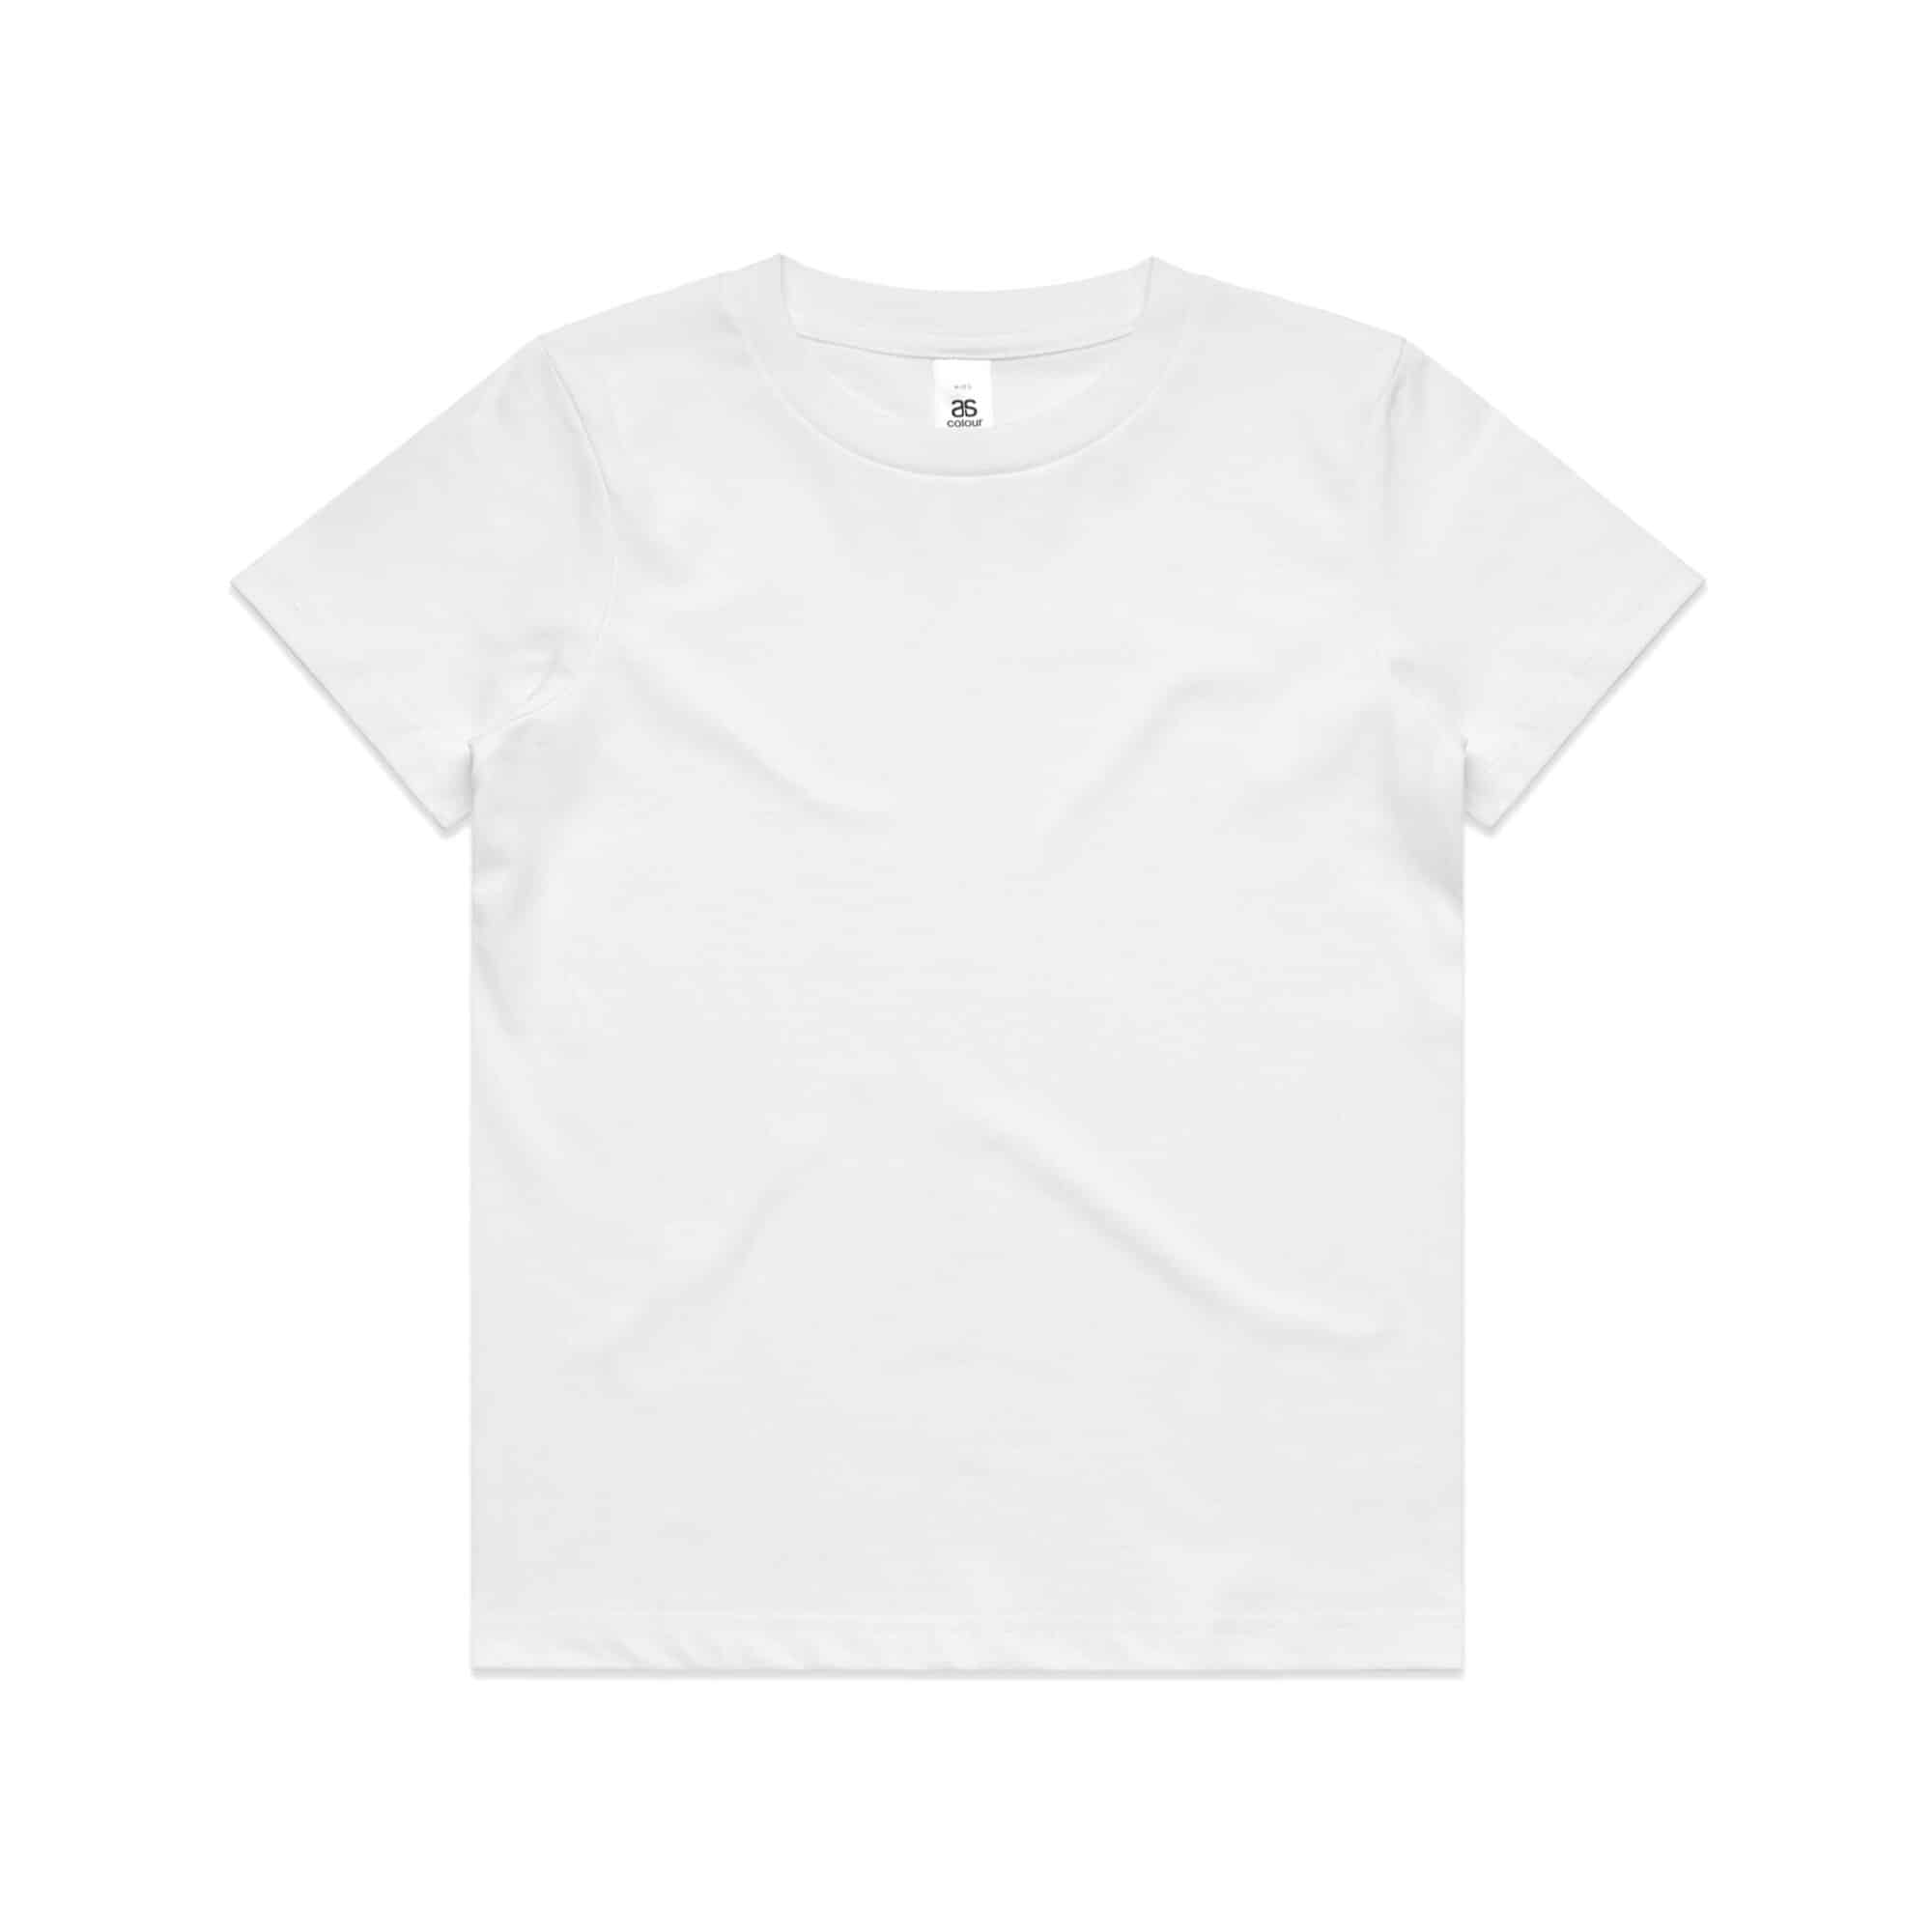 3006_AS_Youth-Tee_White